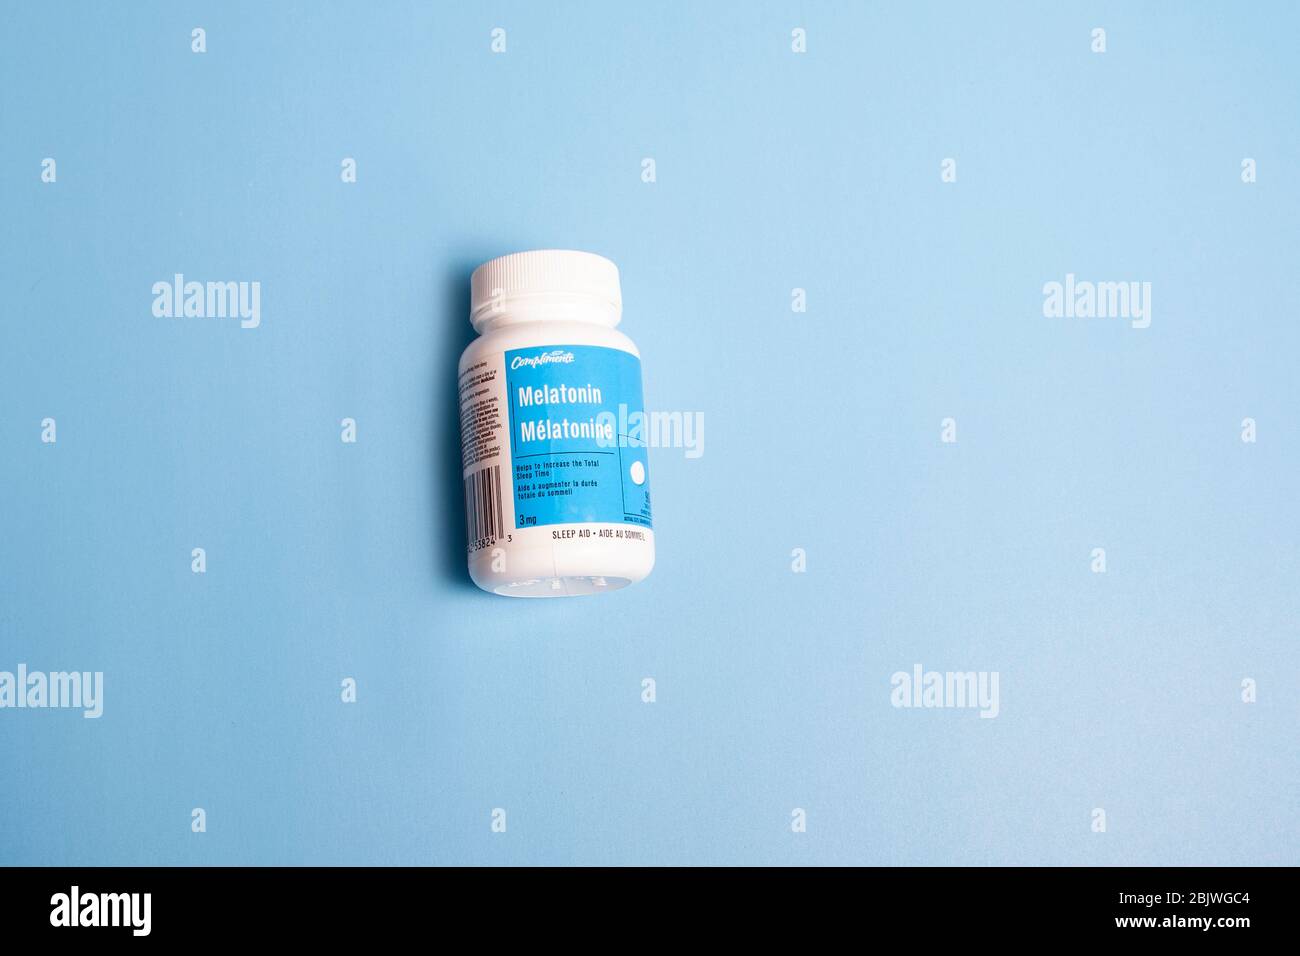 Halifax, Canada - April 11, 2020: A bottle of Our Compliments brand Melatonin which helps with sleep Stock Photo